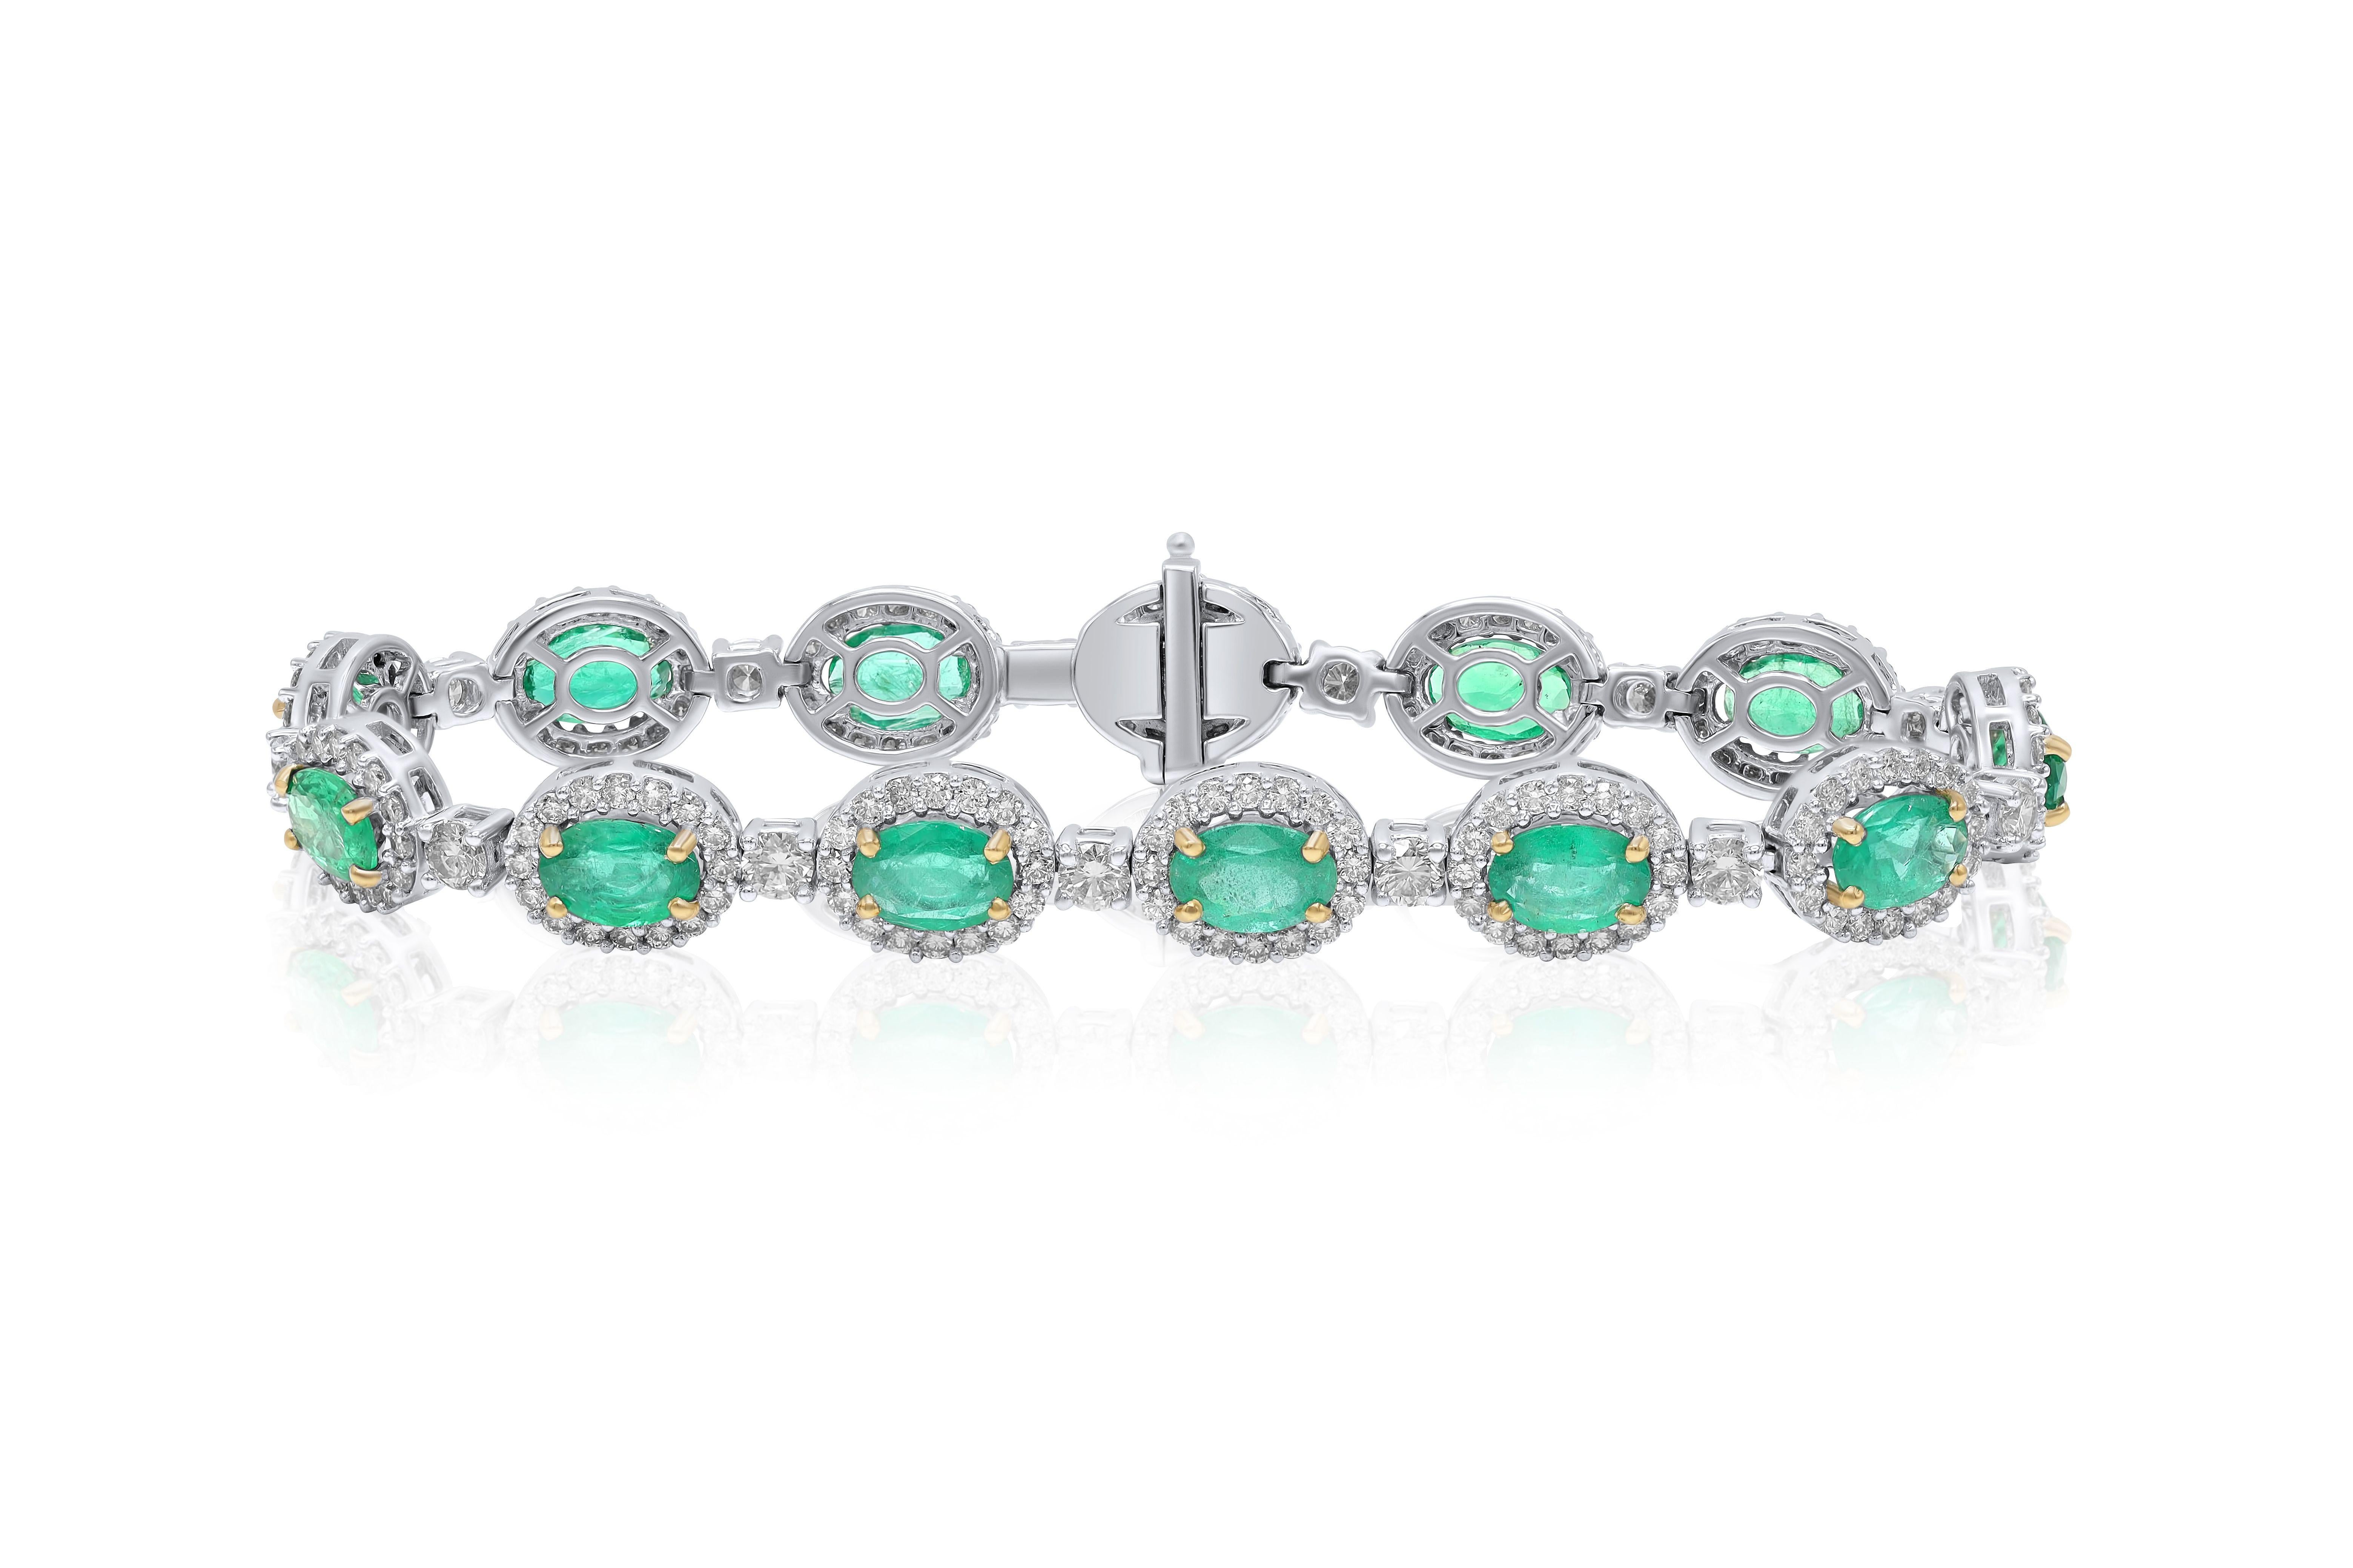 Oval Cut Diana M. 8.01 Carat Emerald and Diamond Bracelet in White Gold For Sale